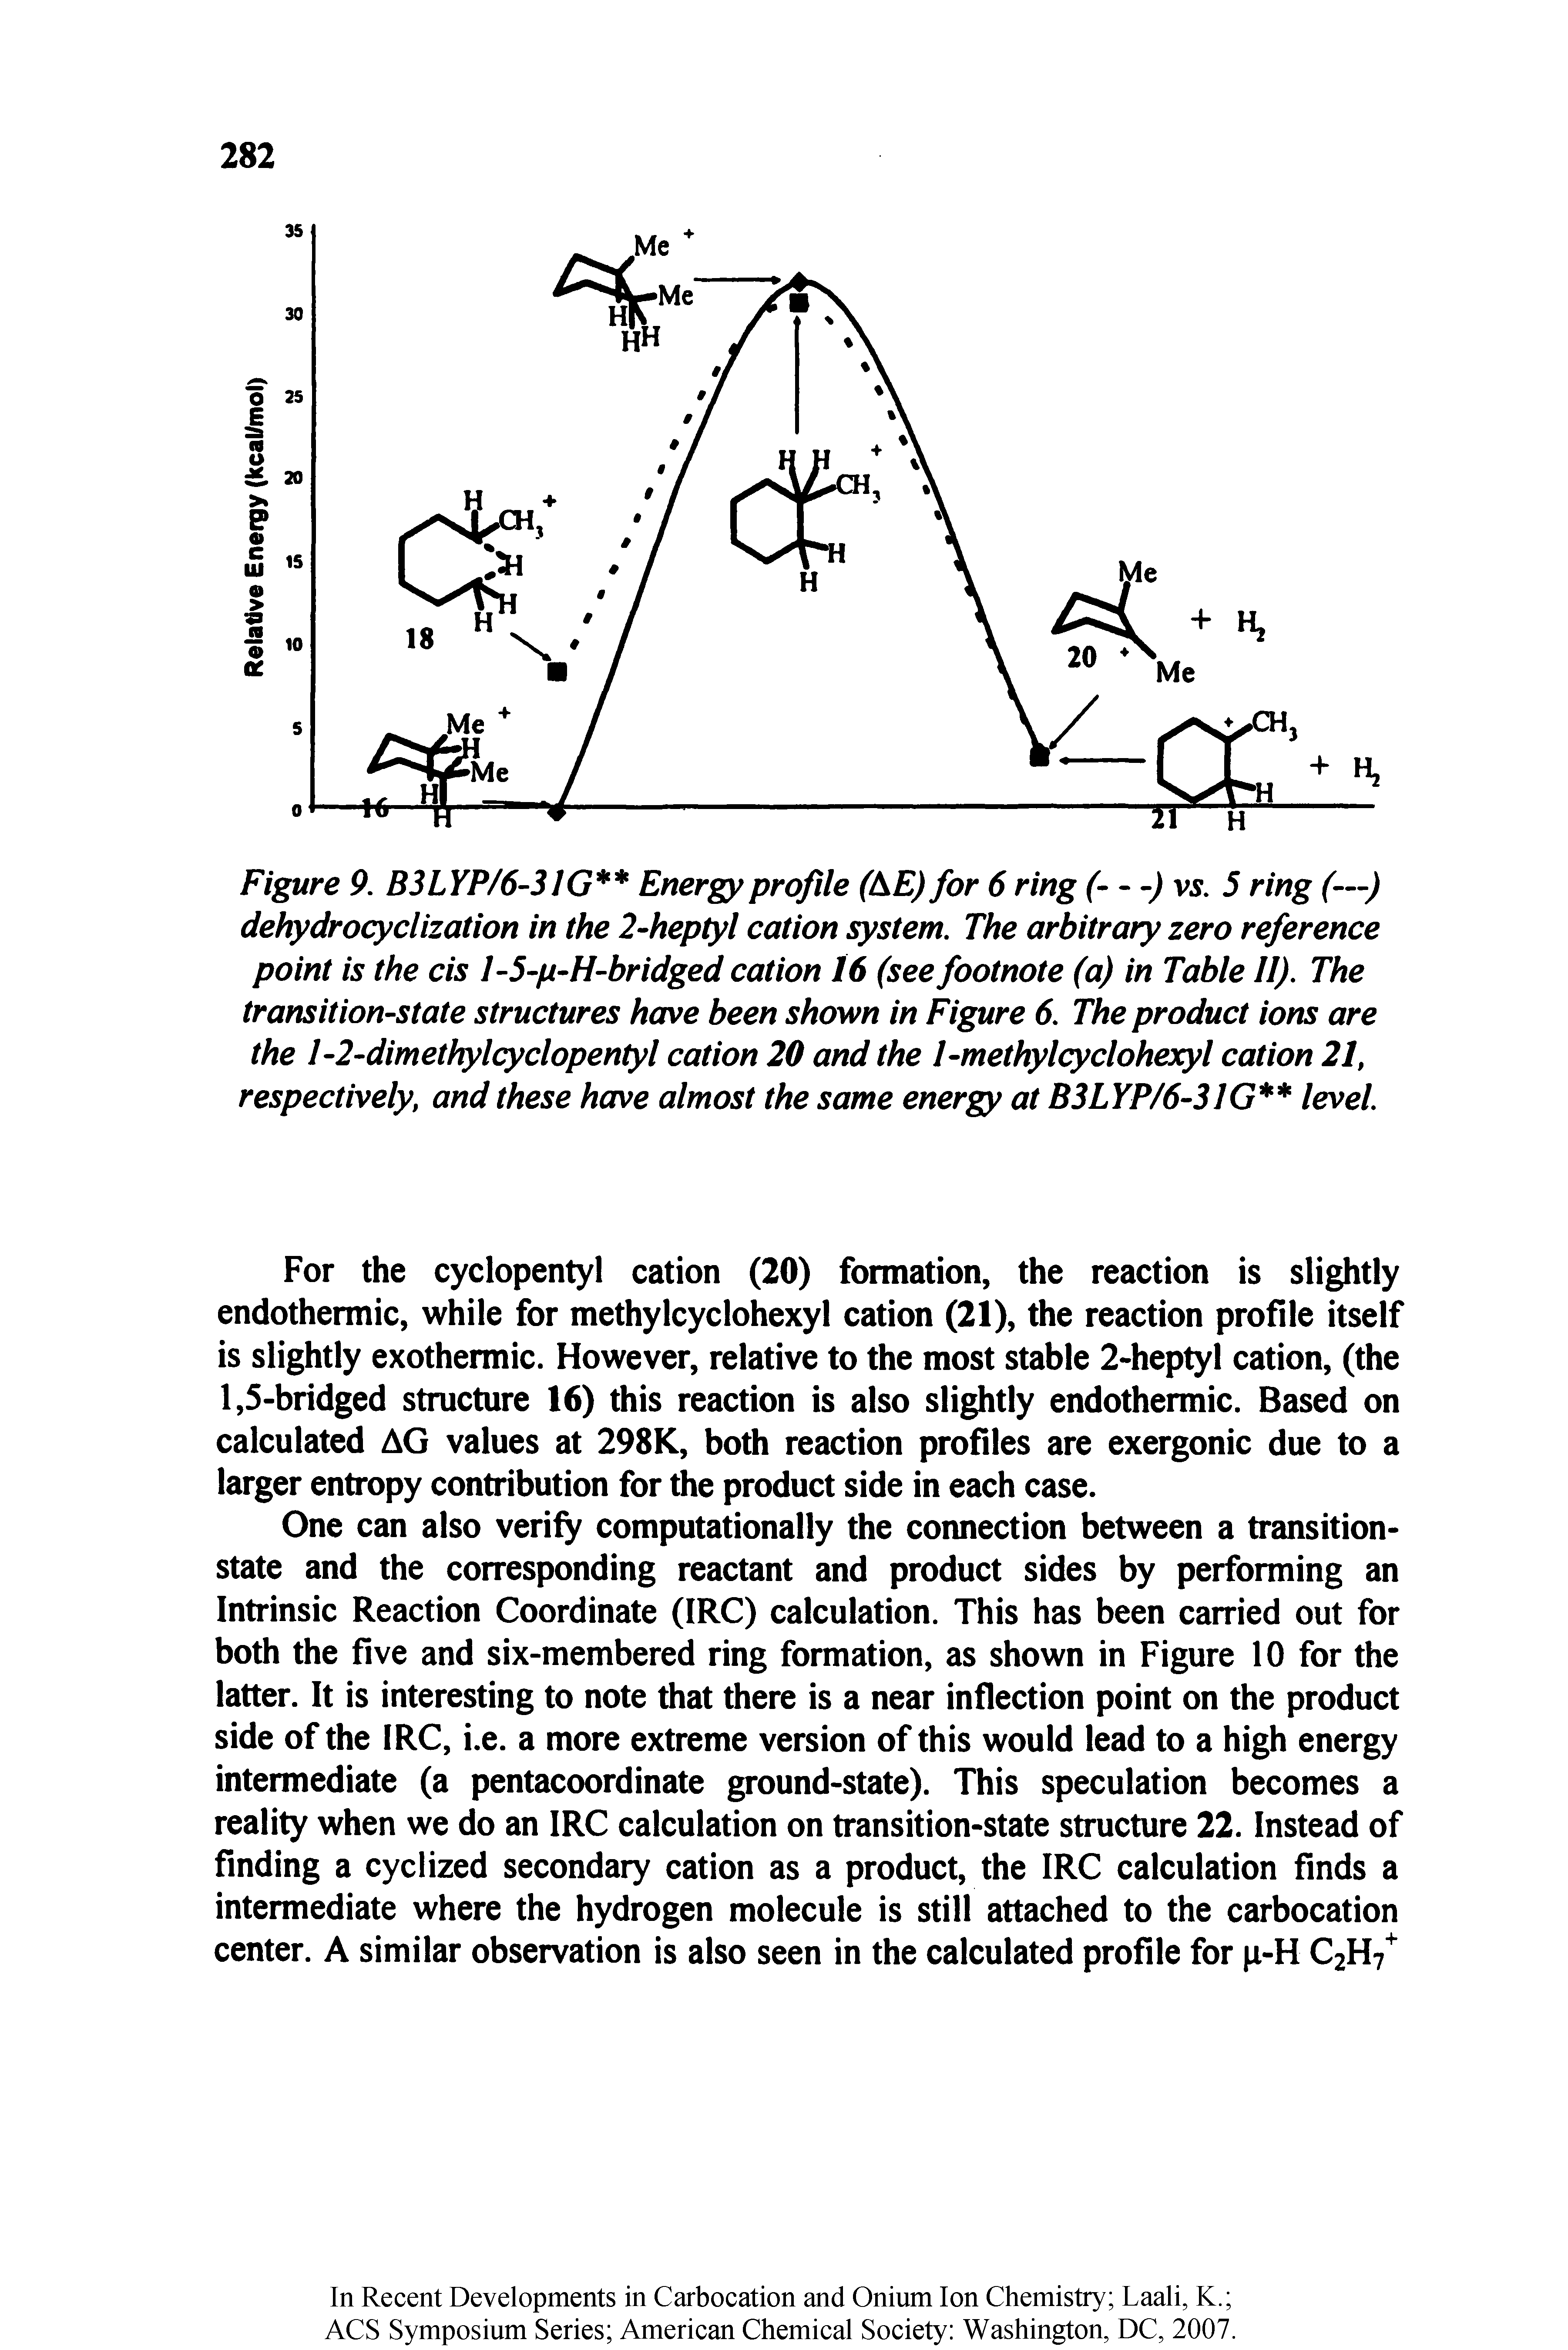 Figure 9. B3LYP/6-3IG Energy profile (LE) for 6 ring (- - ) vs. 5 ring (—) dehydrocyclization in the 2-heptyl cation system. The arbitrary zero reference point is the cis 1-5-p-H-bridged cation 16 (see footnote (a) in Table II). The transition-state structures have been shown in Figure 6. The product ions are the I-2-dimethylcyclopentyl cation 20 and the I-methylcyclohexyl cation 21, respectively, and these have almost the same energy at B3LYP/6-3IG level.